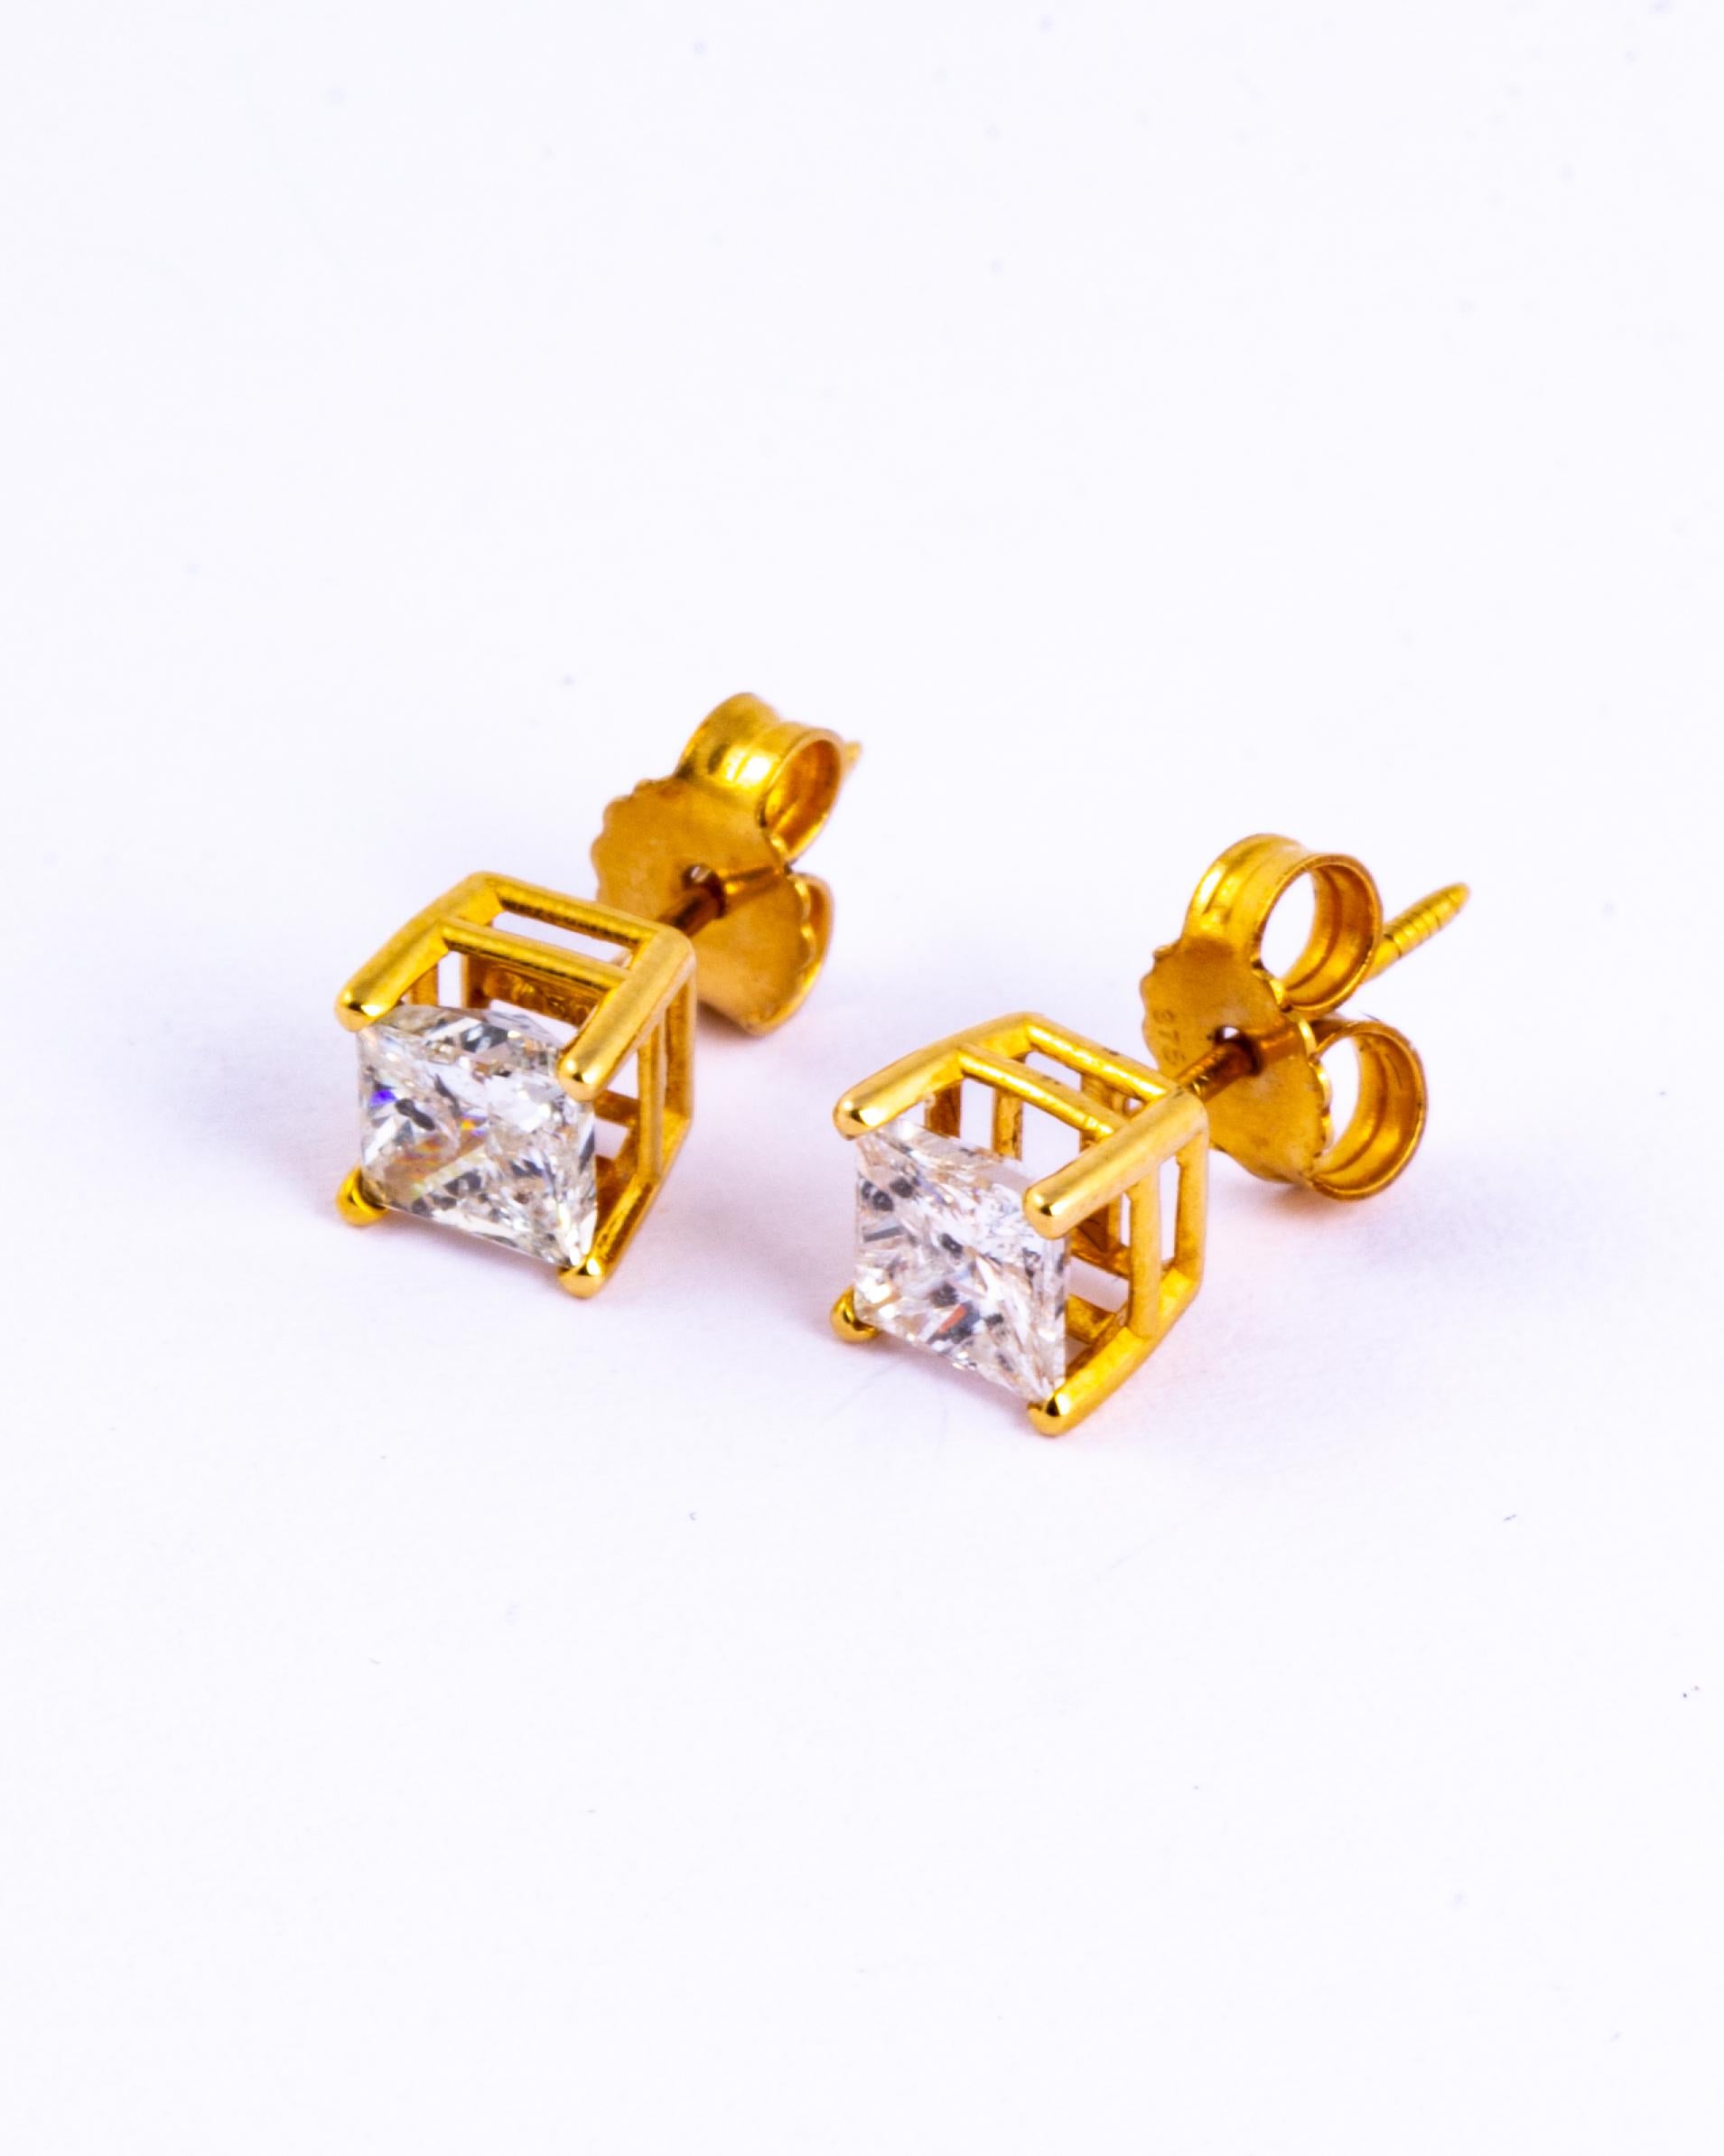 A beautiful pair of vintage stud earrings each set with a stunning Princess cut diamonds, colour H and VS1 clarity. Total carat weight together approximated 1.10 carats. Modelled in 14 carat gold.

Diamond Dimensions: 5x5mm
Height off ear: